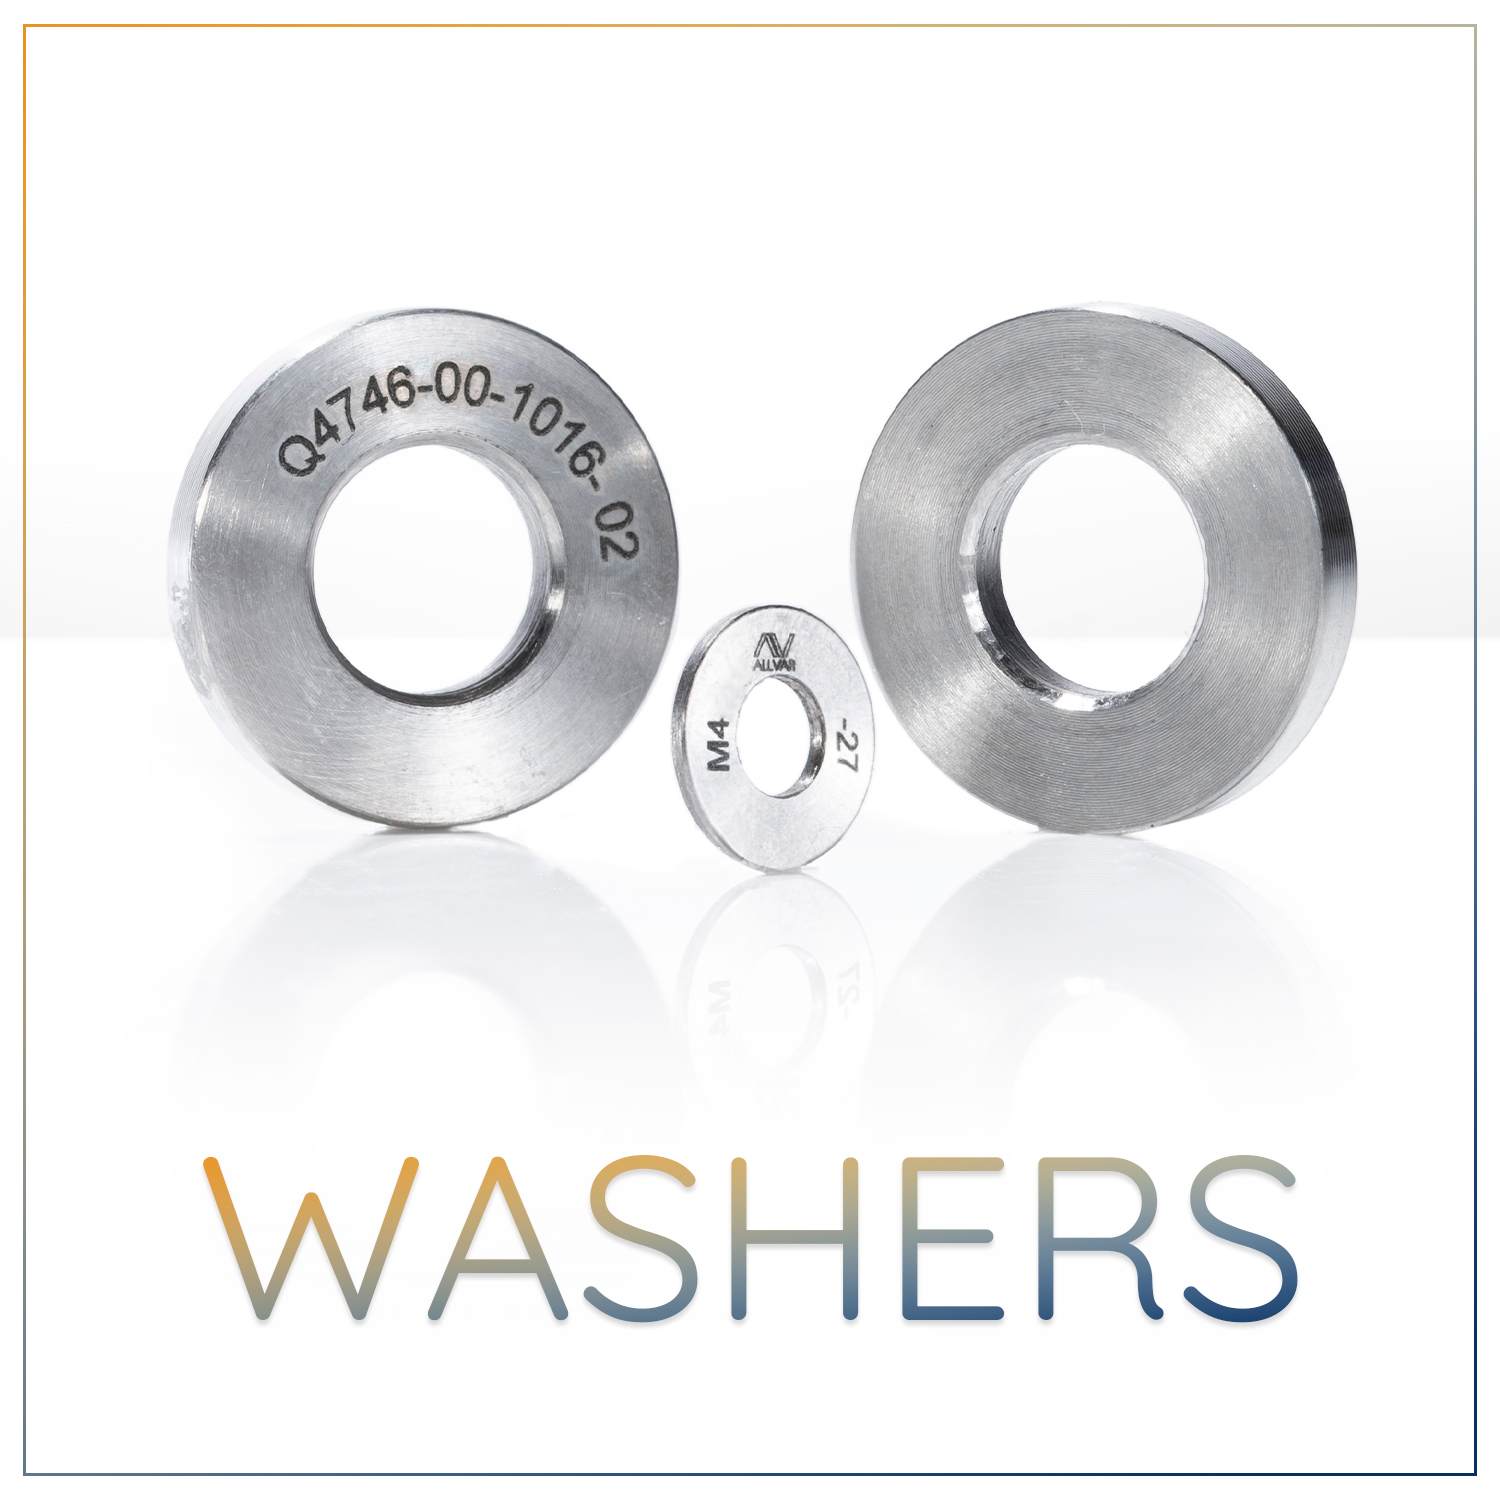 Athermal washers for constant force